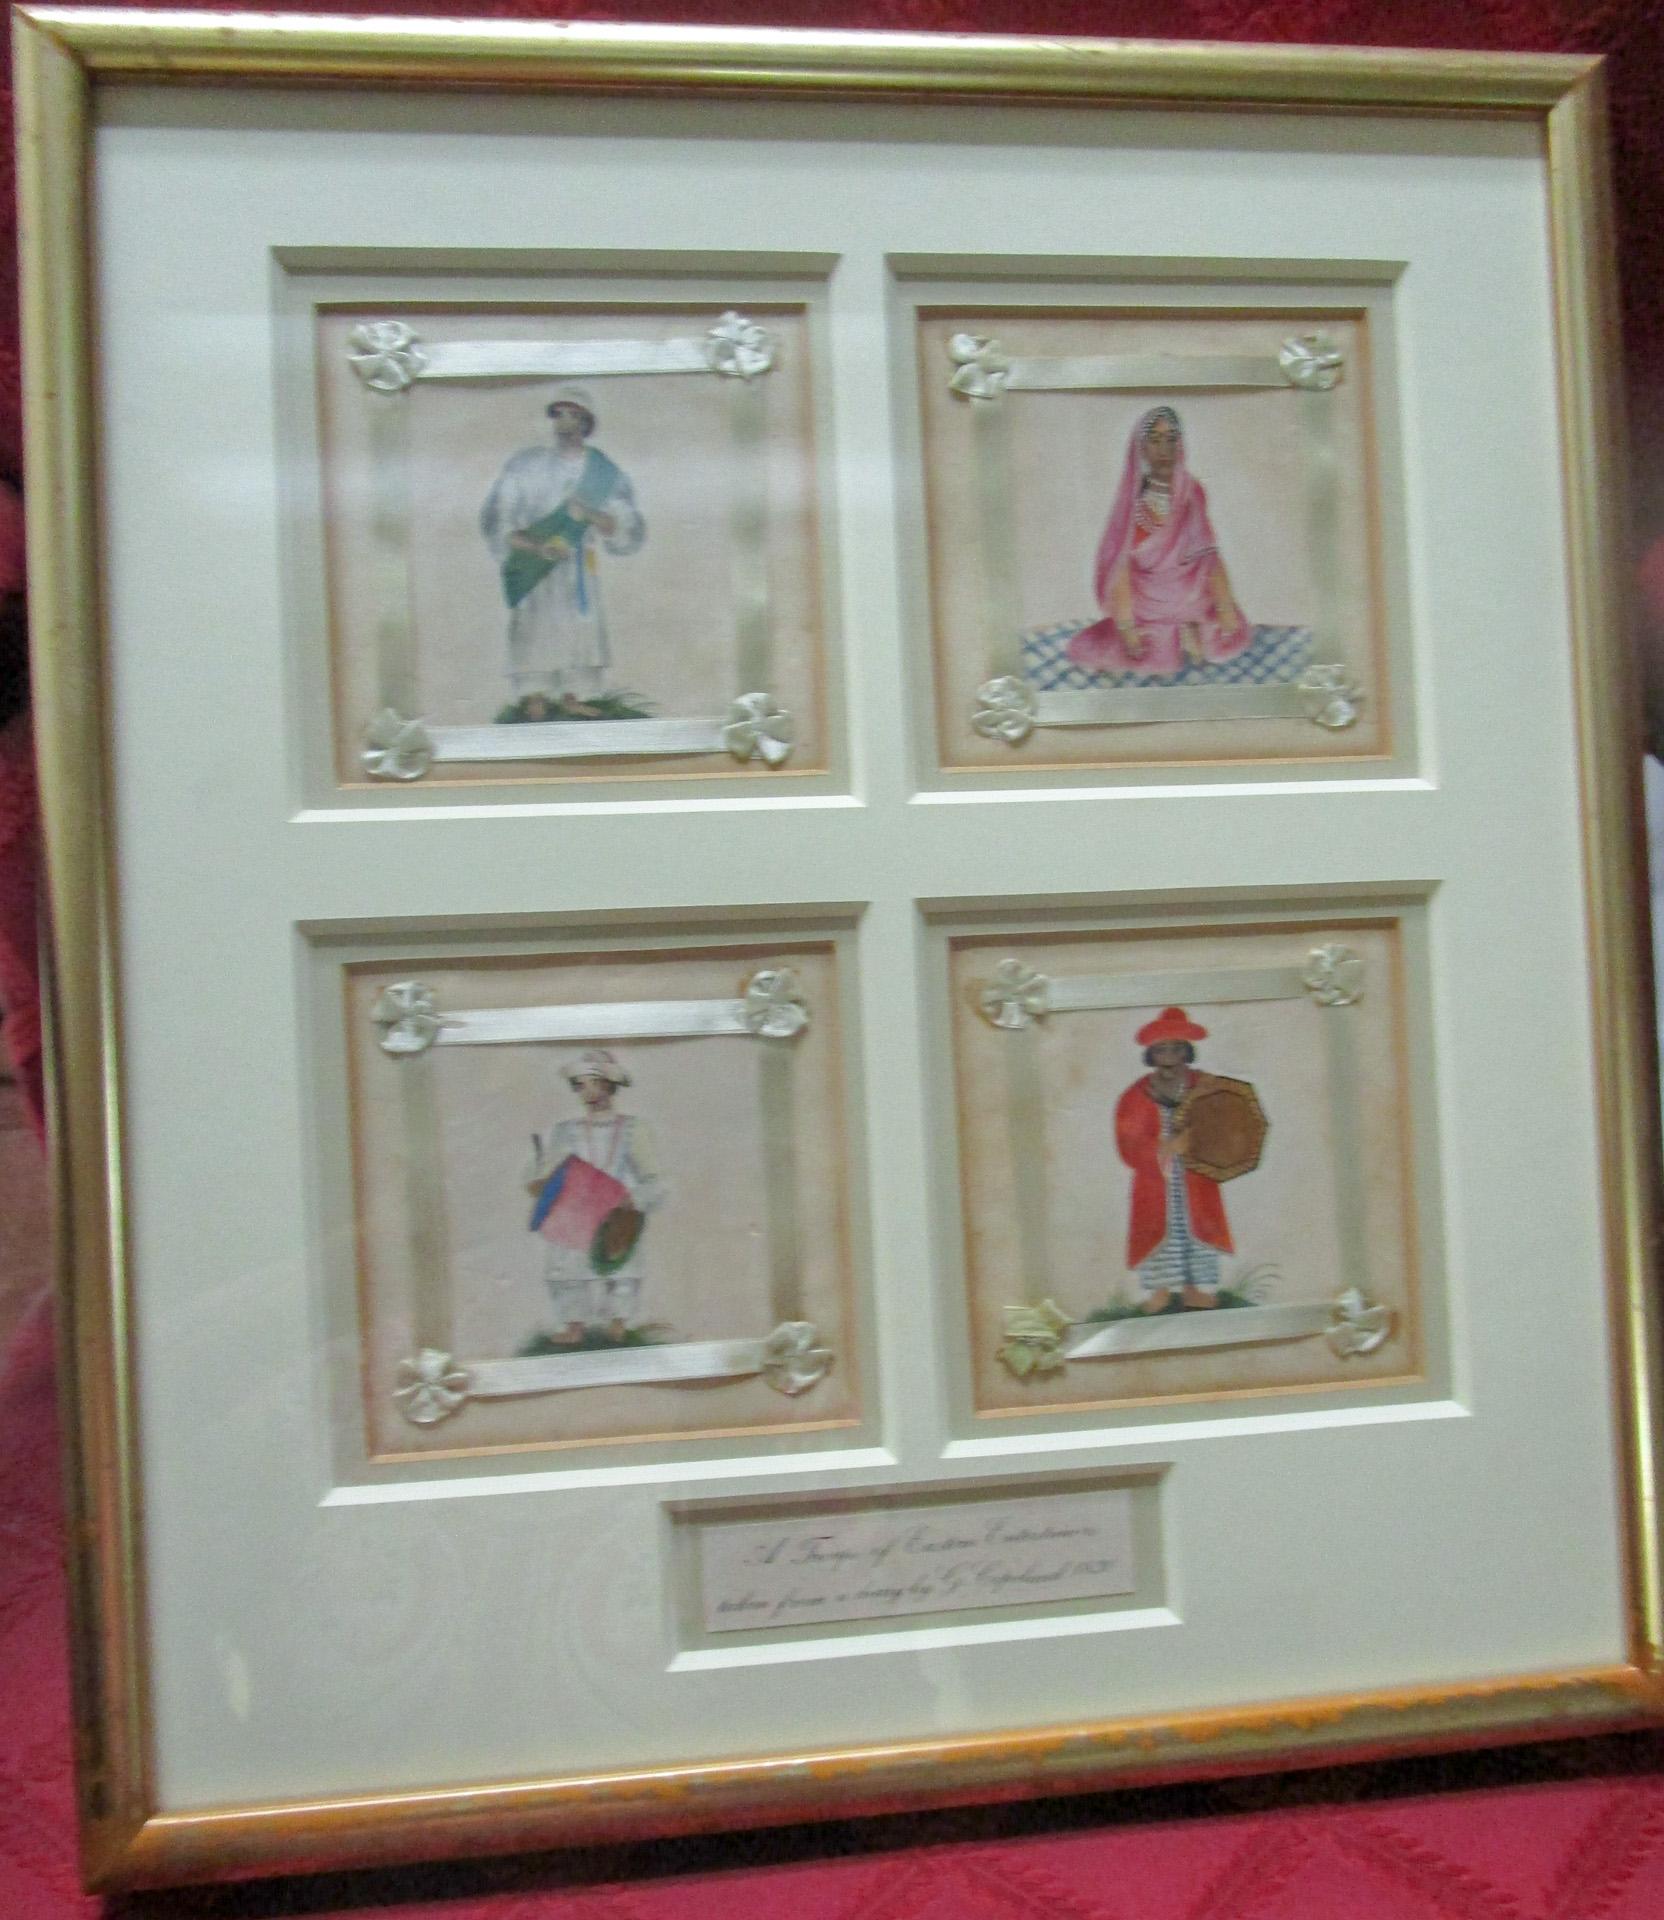 1830 Watercolor and Gouache Painted Vignettes of Eastern Entertainers  In Good Condition For Sale In Savannah, GA